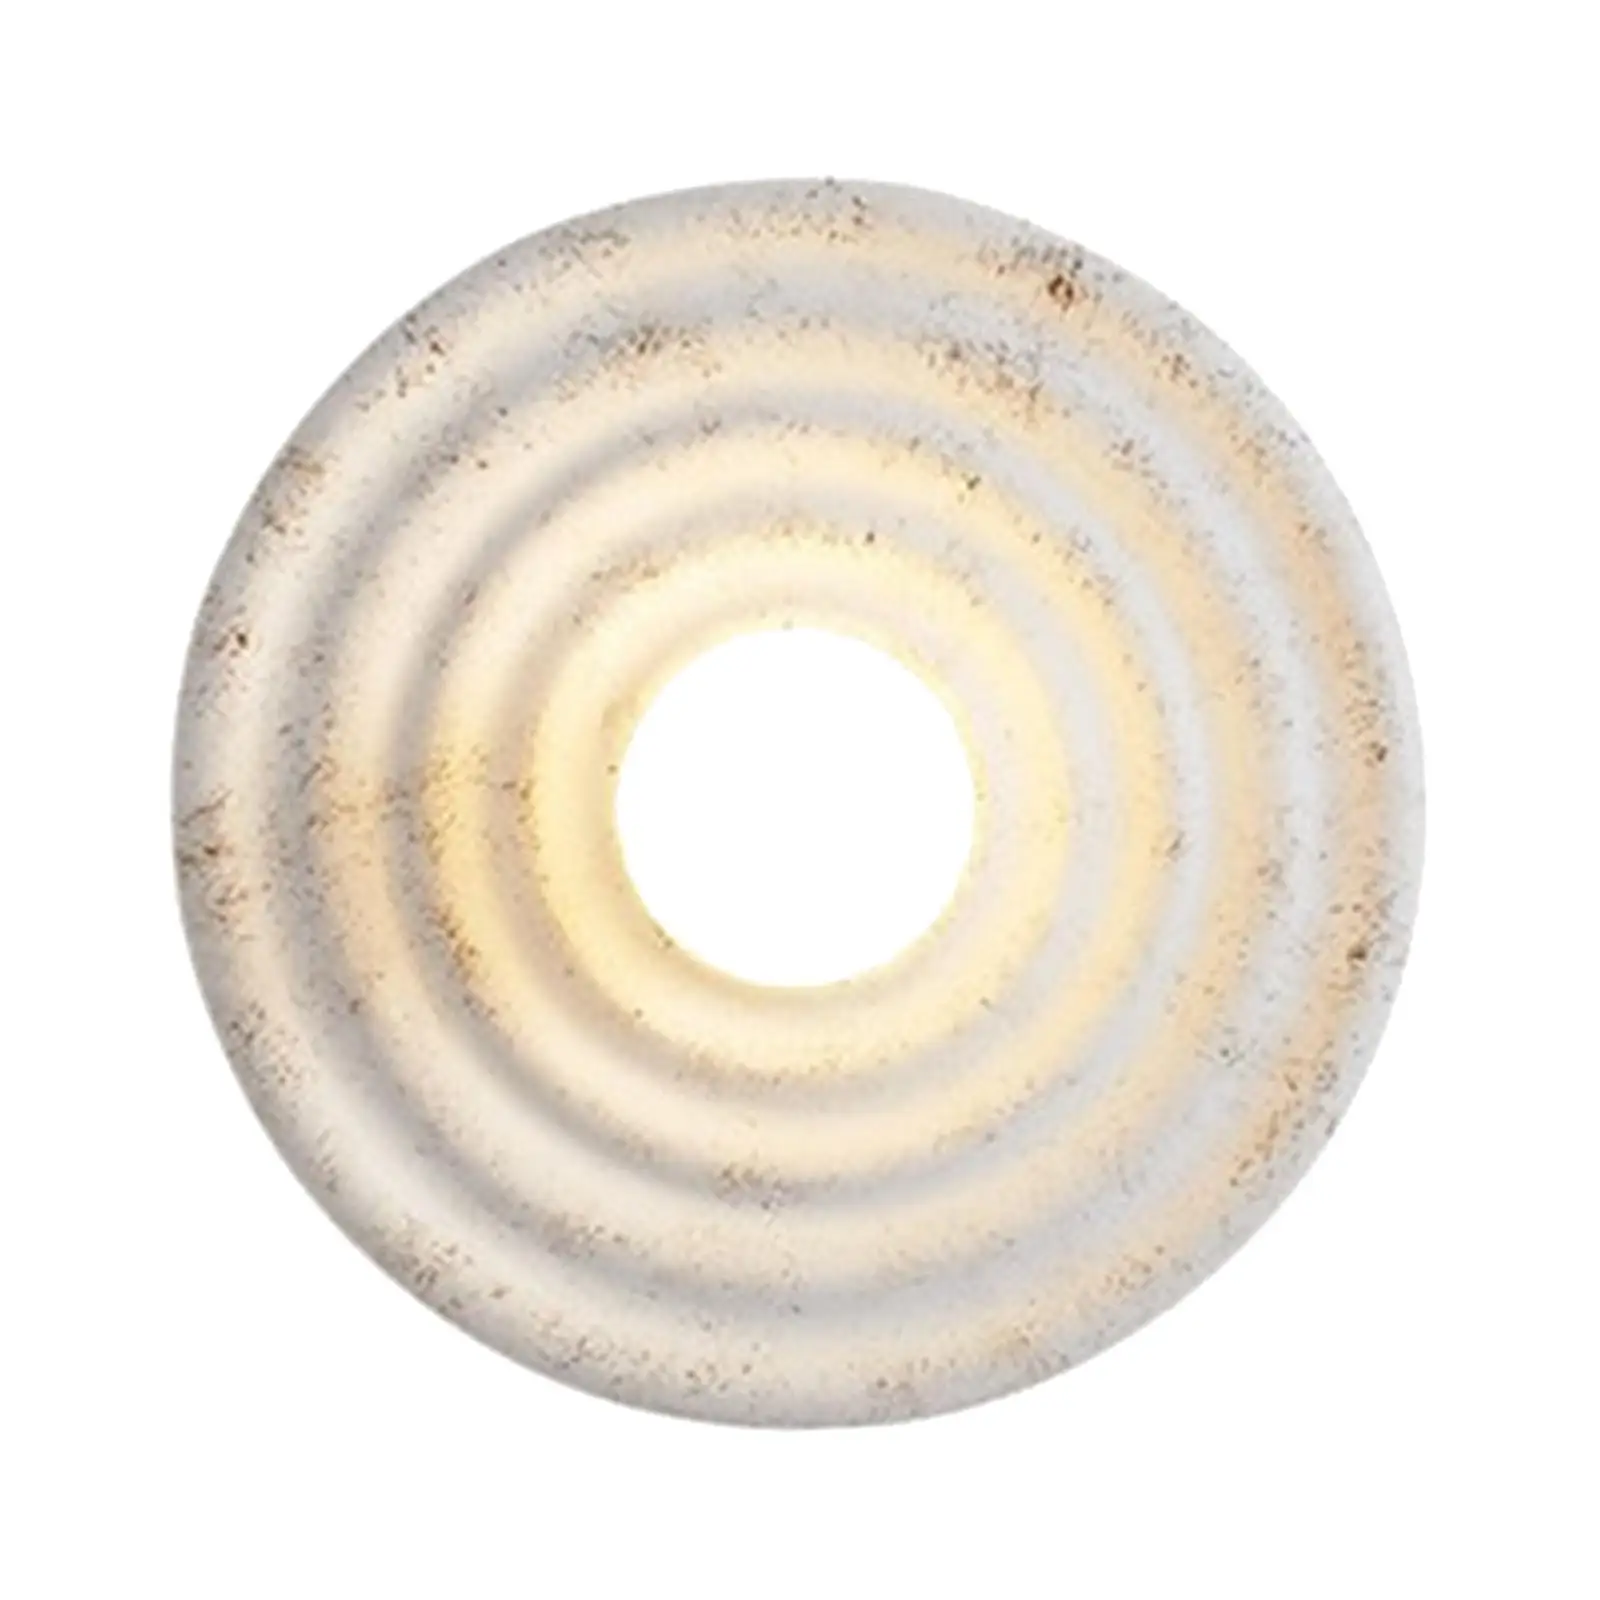 Round Wall Lamp Wall Lights Fixtures Wall Sconces Lighting for Loft Barn